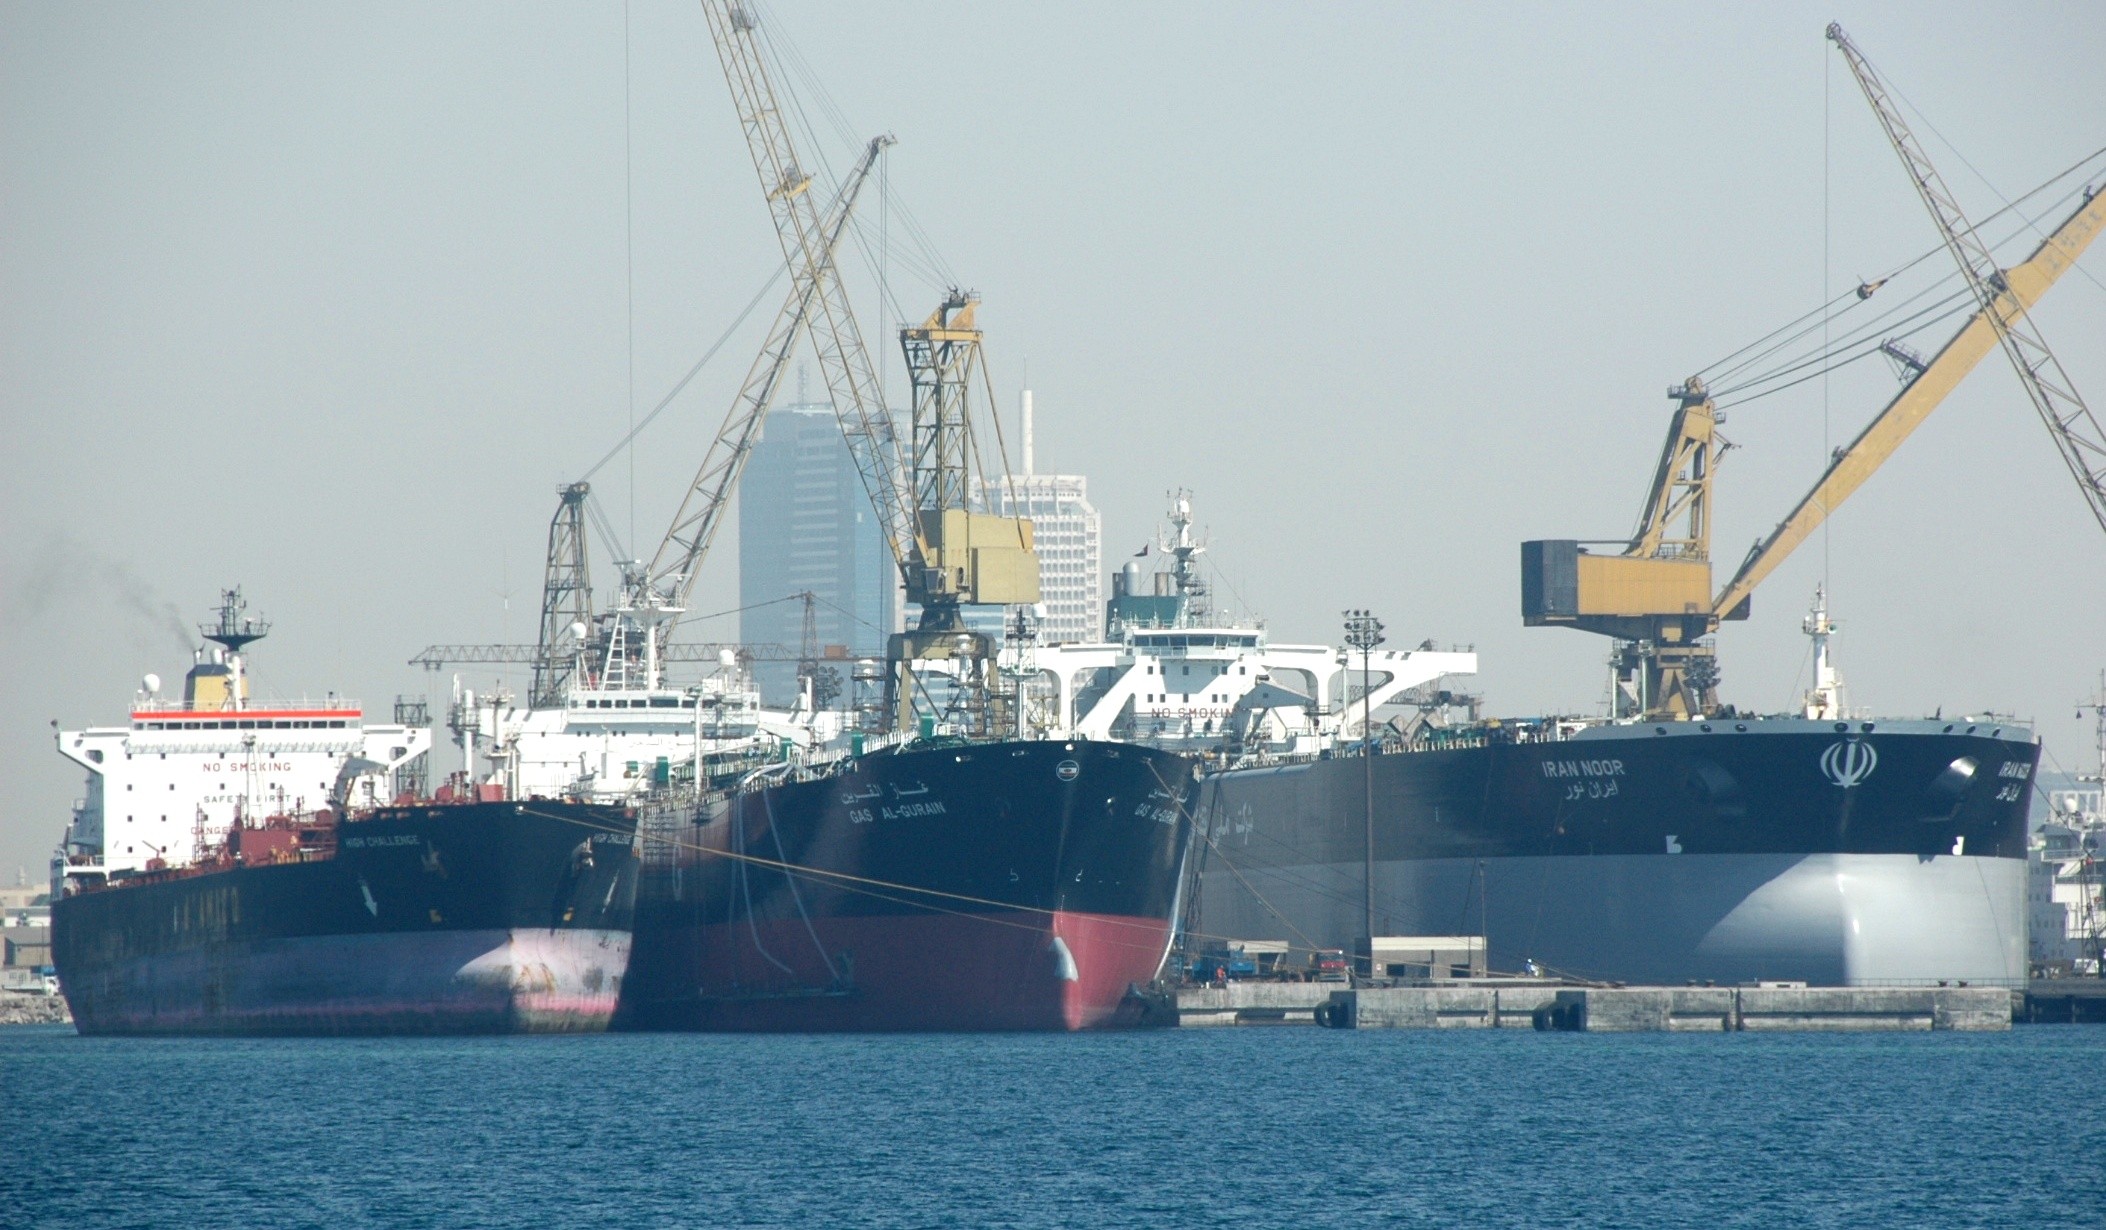 NIOC Eyes Sale of 1.4 mbpd of Crude Oil in Fiscal 2023-24